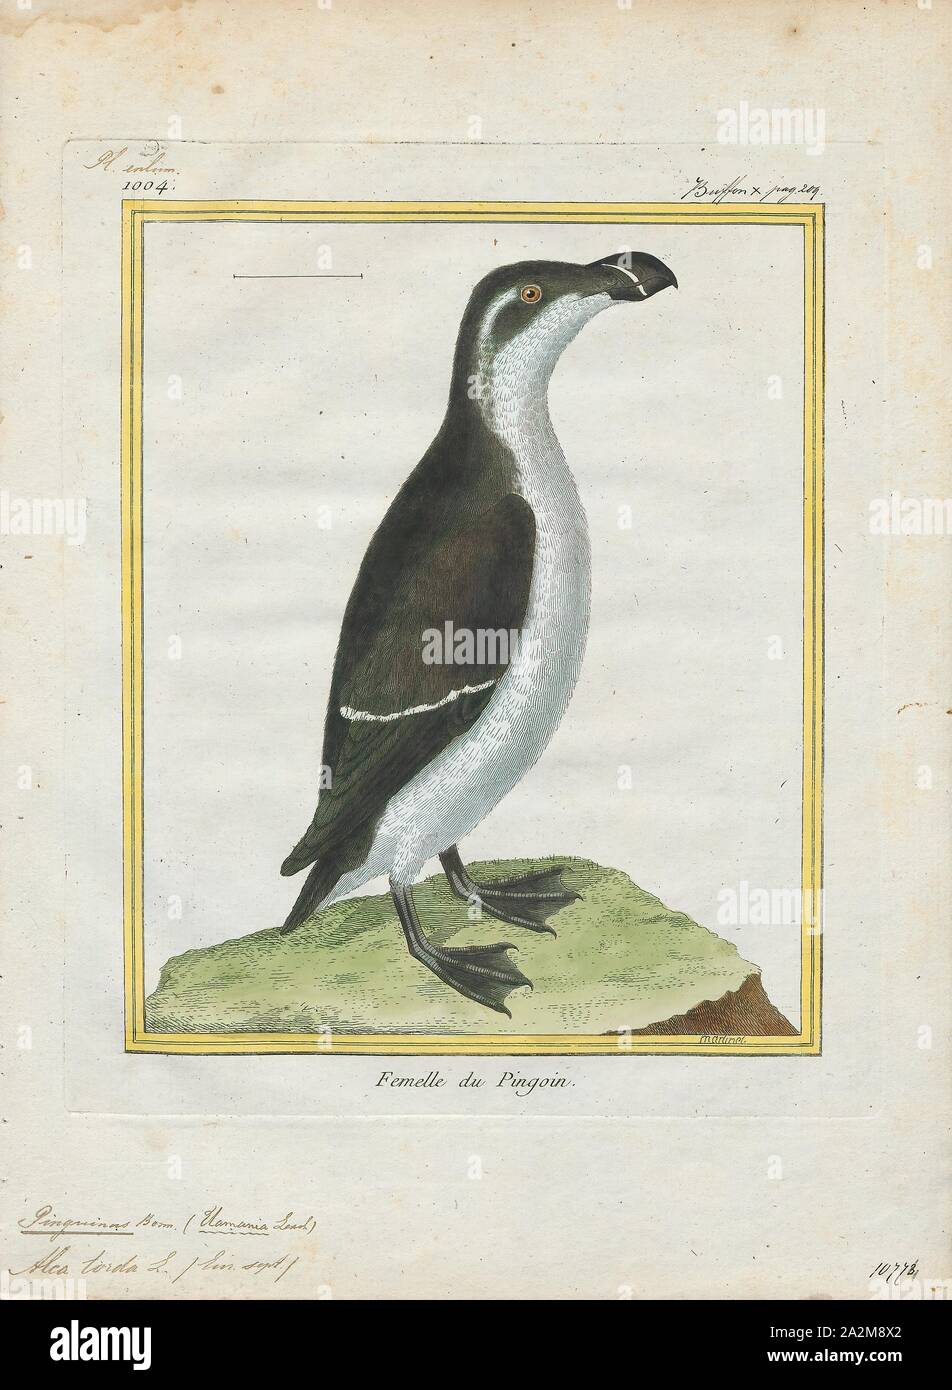 Chenalopex torda, Print, Great auk, The great auk (Pinguinus impennis) is an extinct species of flightless alcid that became extinct in the mid-19th century. It was the only modern species in the genus Pinguinus. It is not closely related to the birds now known as penguins, which were discovered later and so named by sailors because of their physical resemblance to the great auk., 1700-1880 Stock Photo